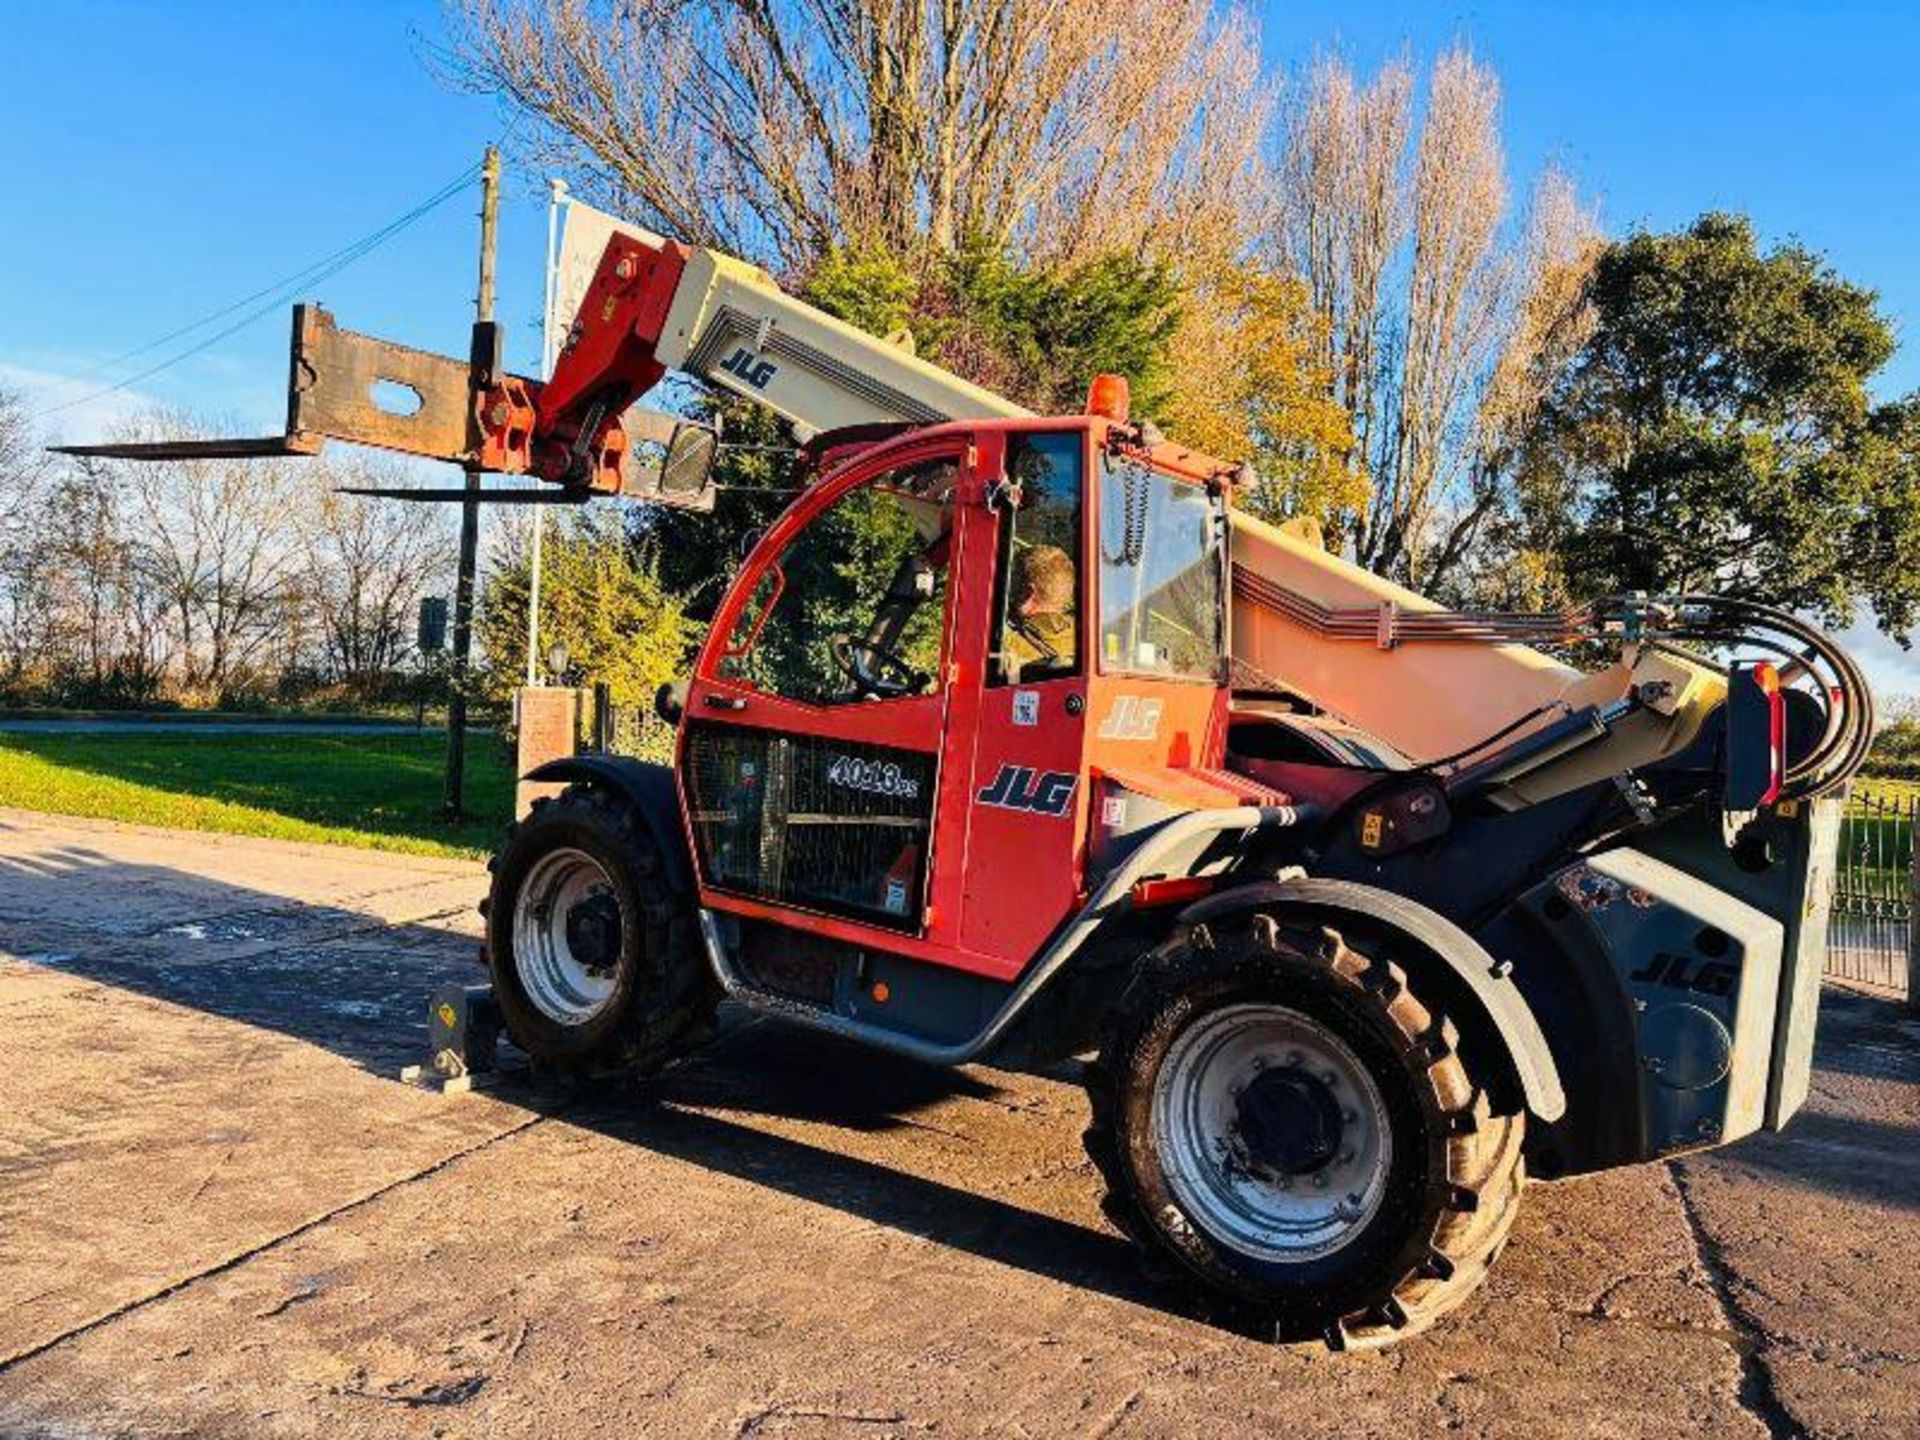 JLG 4013 4WD TELEHANDLER *YEAR 2008, 6264 HOURS* C/W LONG PALLET TINES - Image 11 of 18